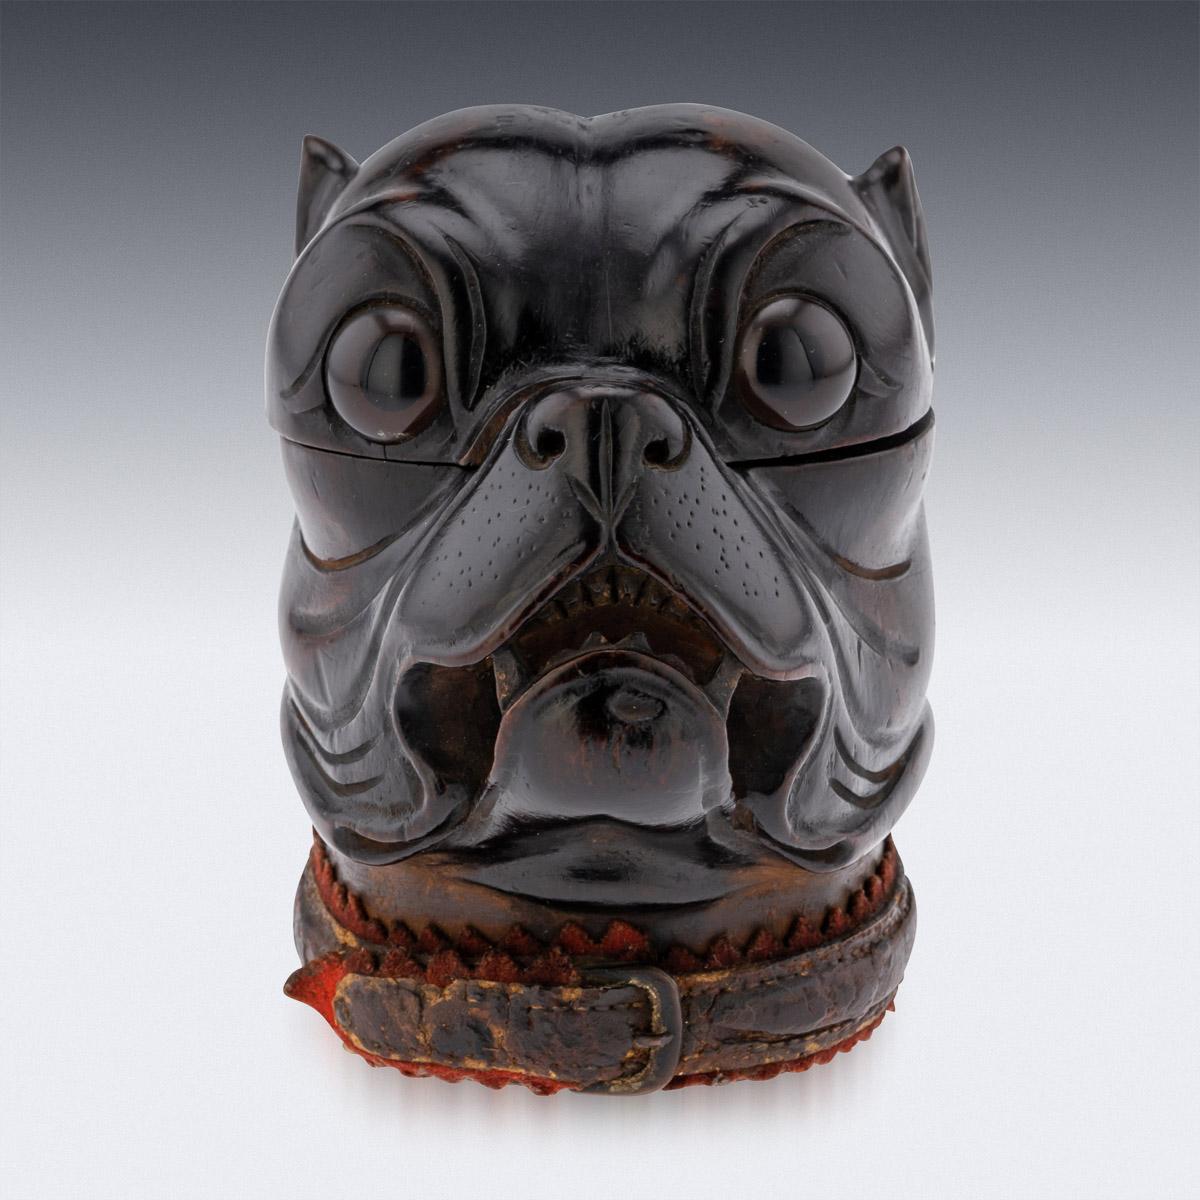 19th century Victorian lignum vitae inkwell modelled as the head of a growling bulldog with realistic glass inset eyes, original leather collar with a copper buckle. The head is hinged and opens to reveal an empty ink pot insert